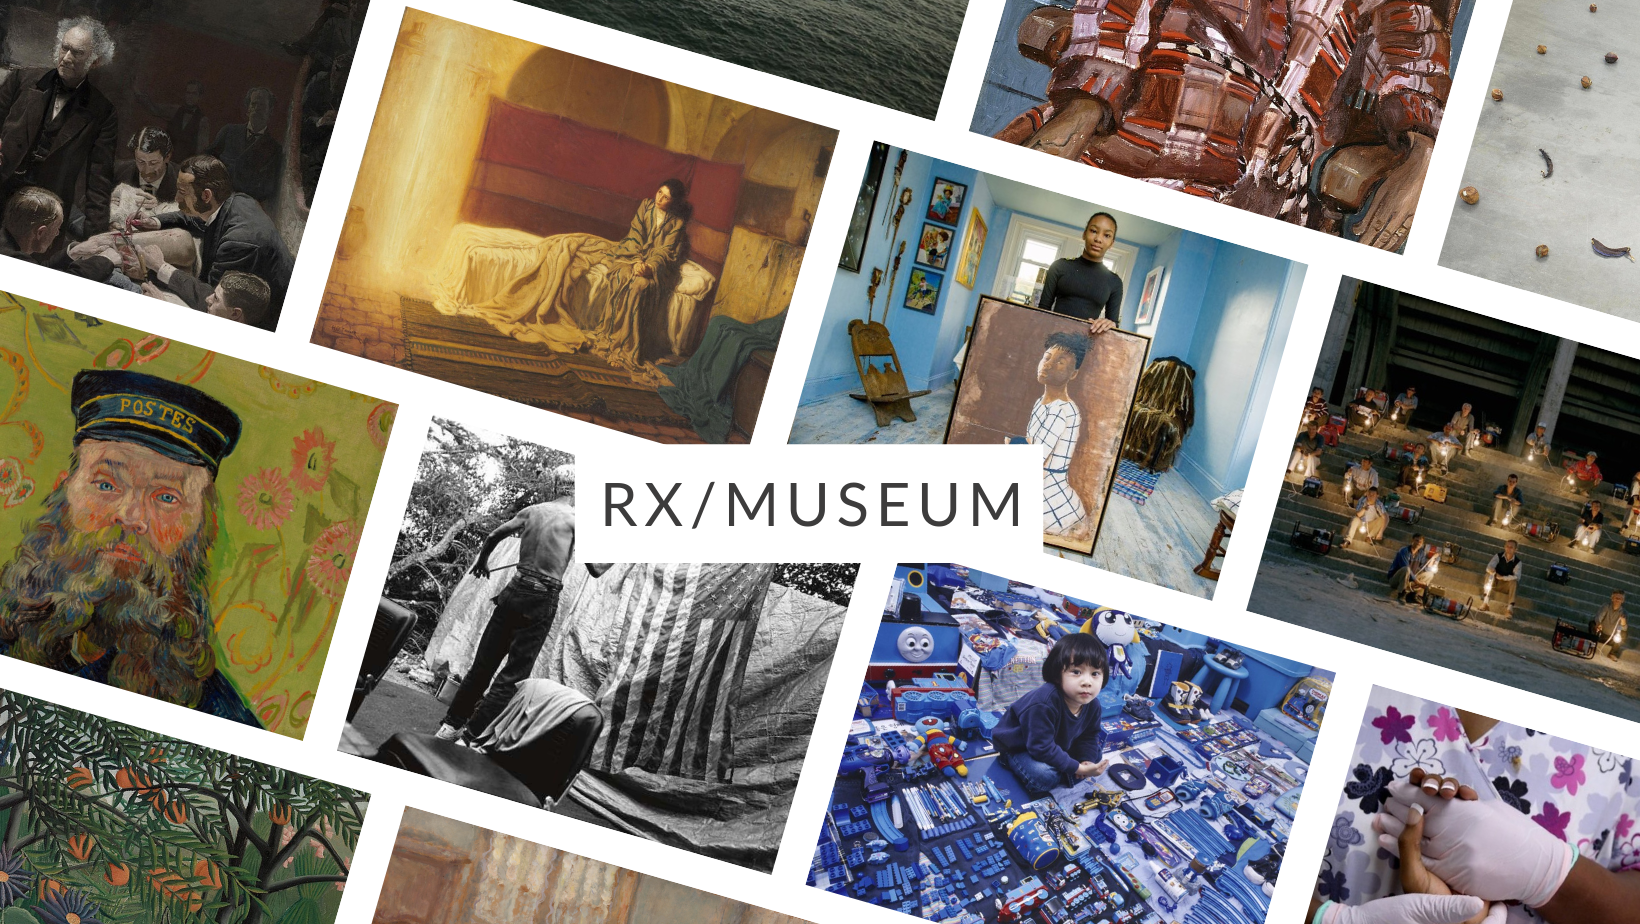 Rx/Museum and various artworks